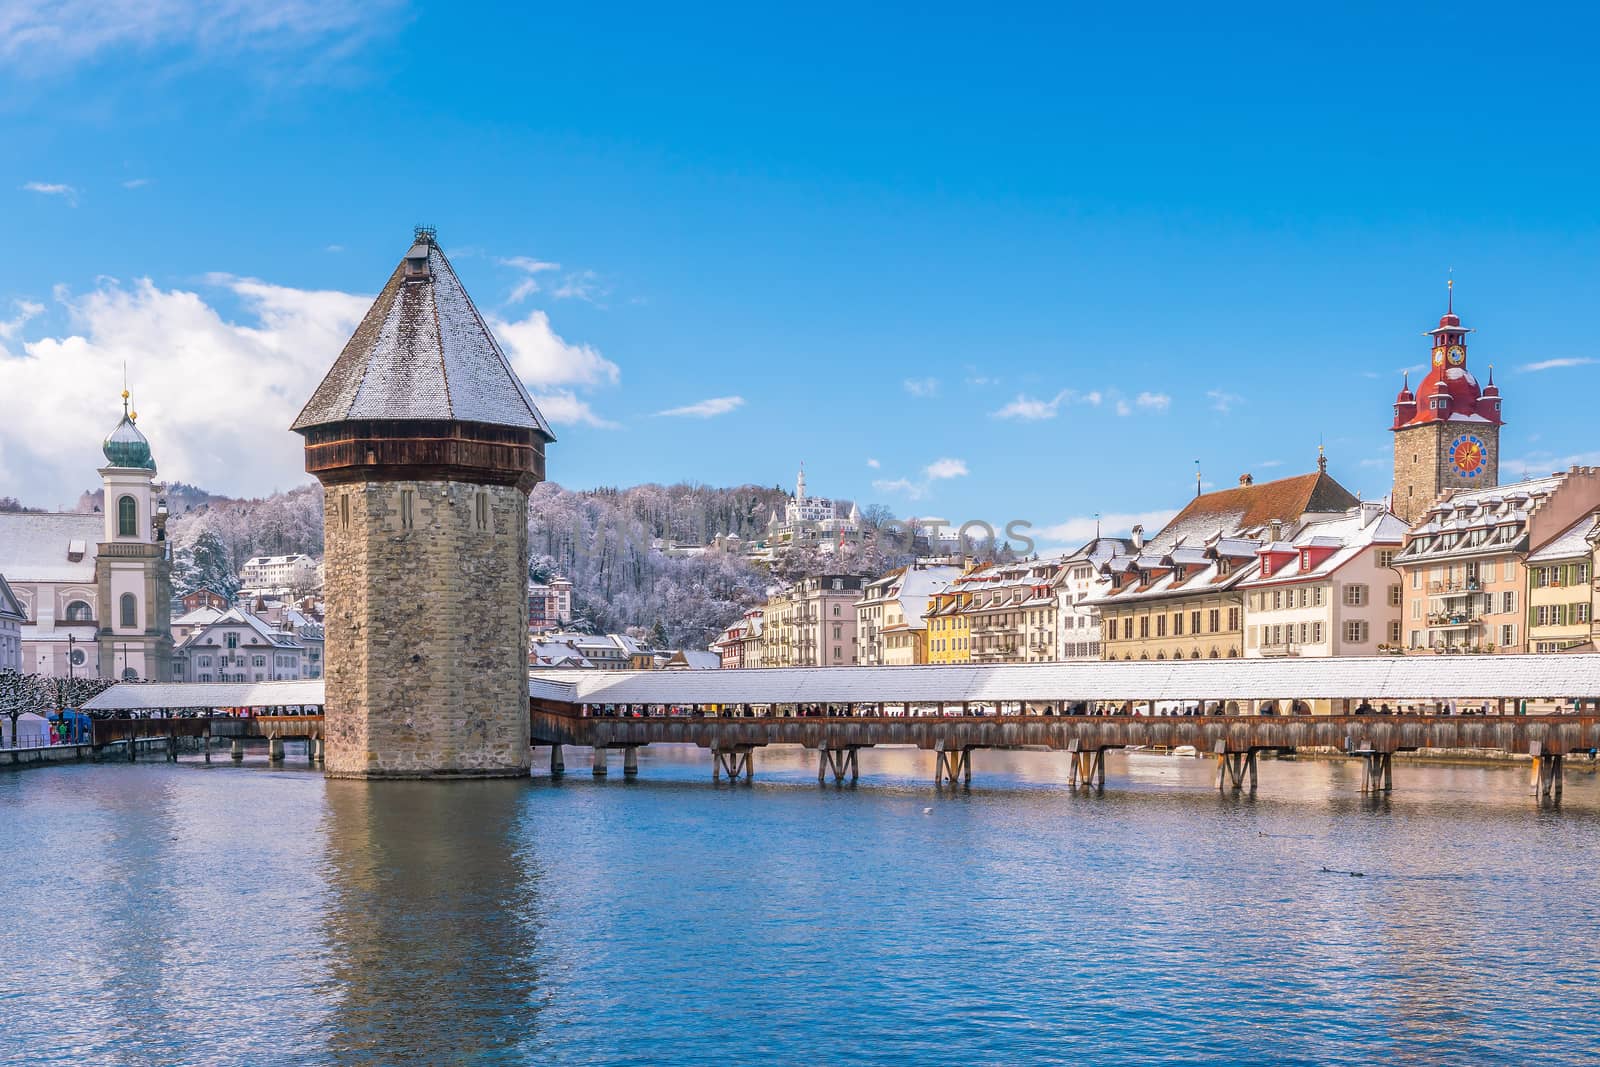 Historic city center of downtown Lucerne with  Chapel Bridge and lake Lucerne in Switzerland